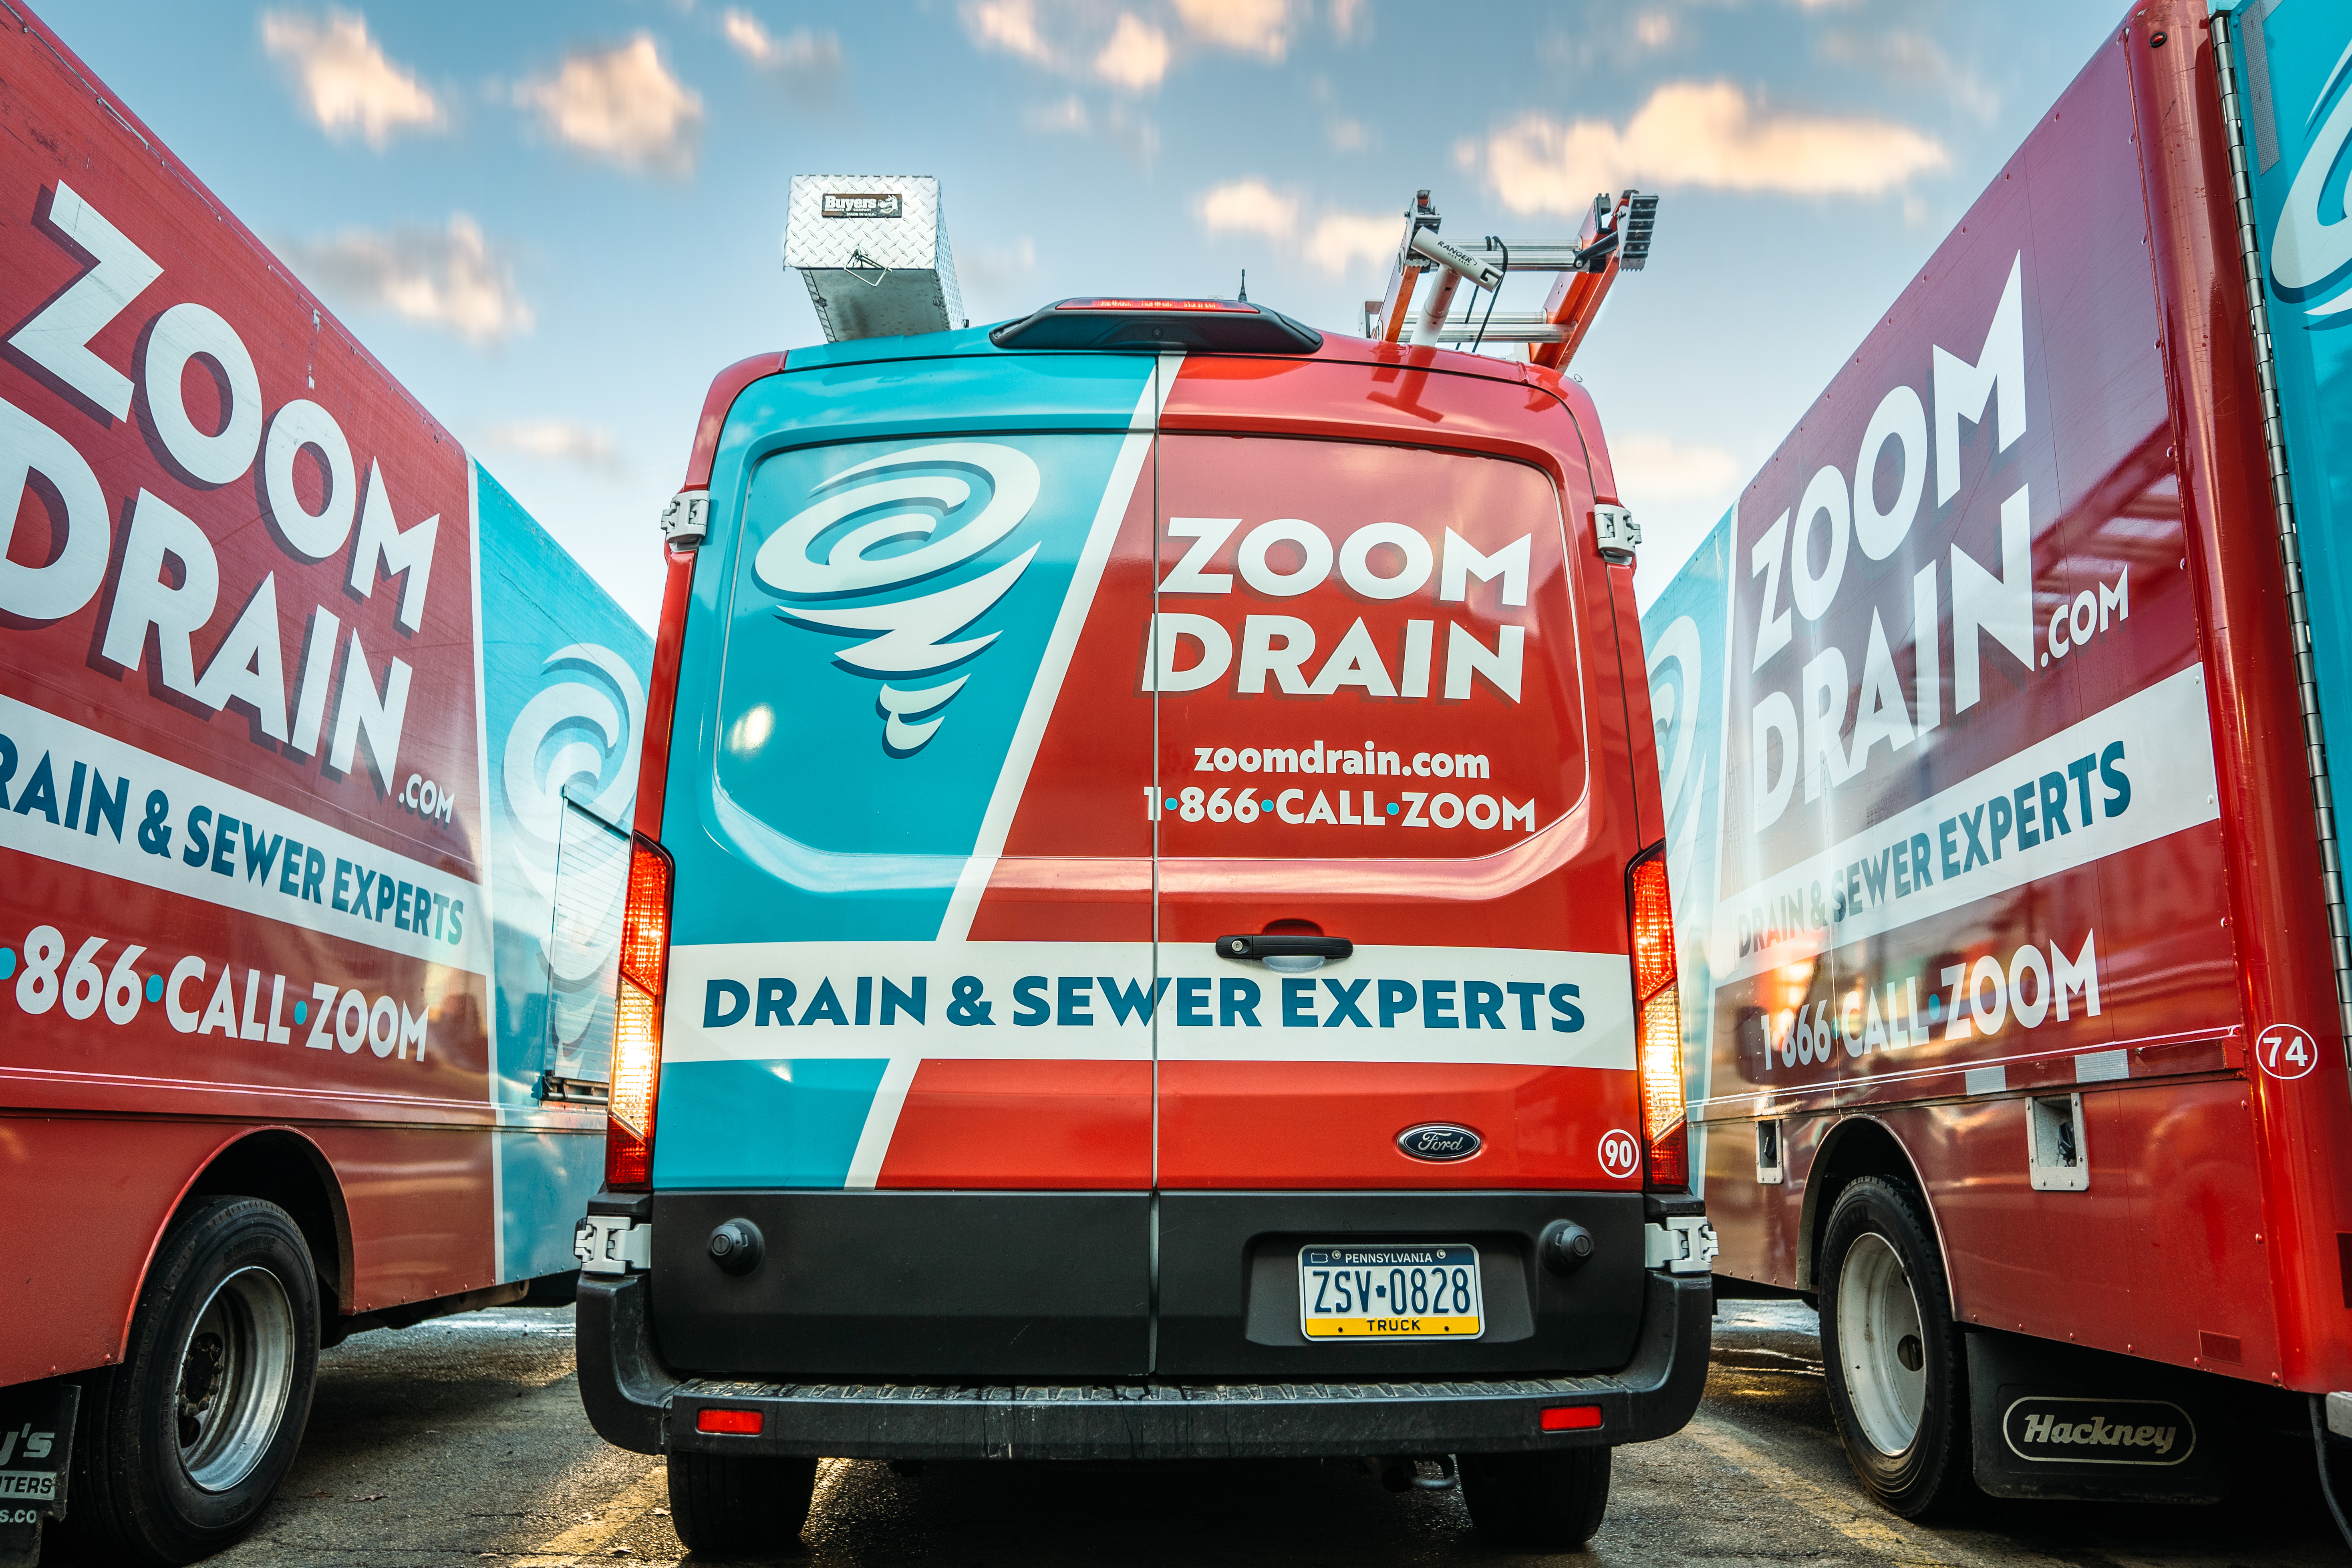 Several Fun Facts You Might Not Have Known About Zoom Drain's Trucks